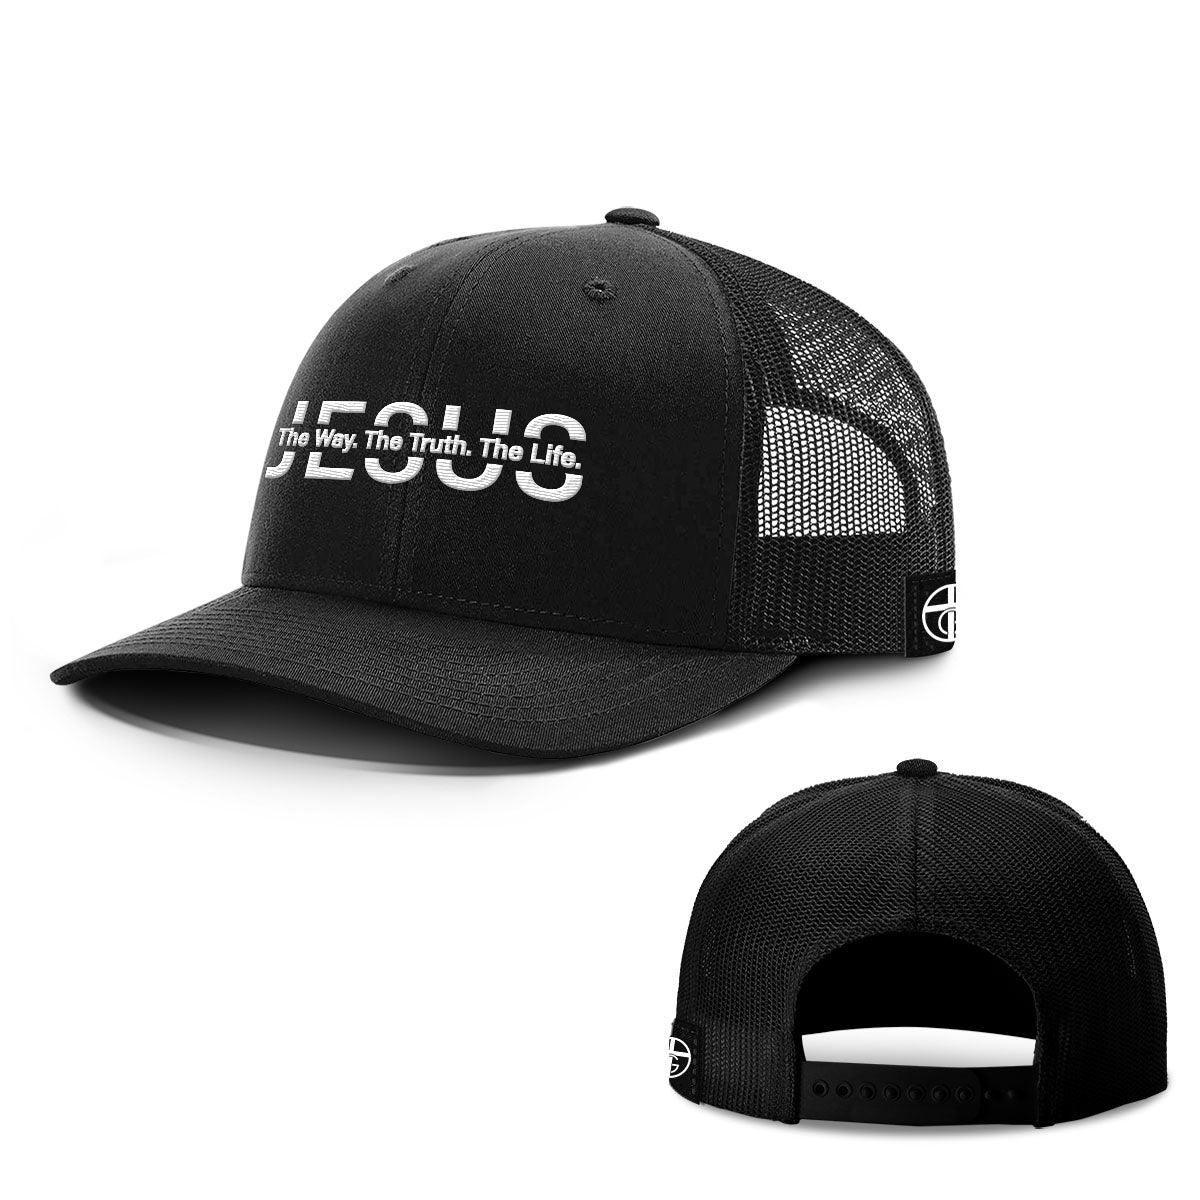 Jesus The Way. The Truth. The Life. Hats